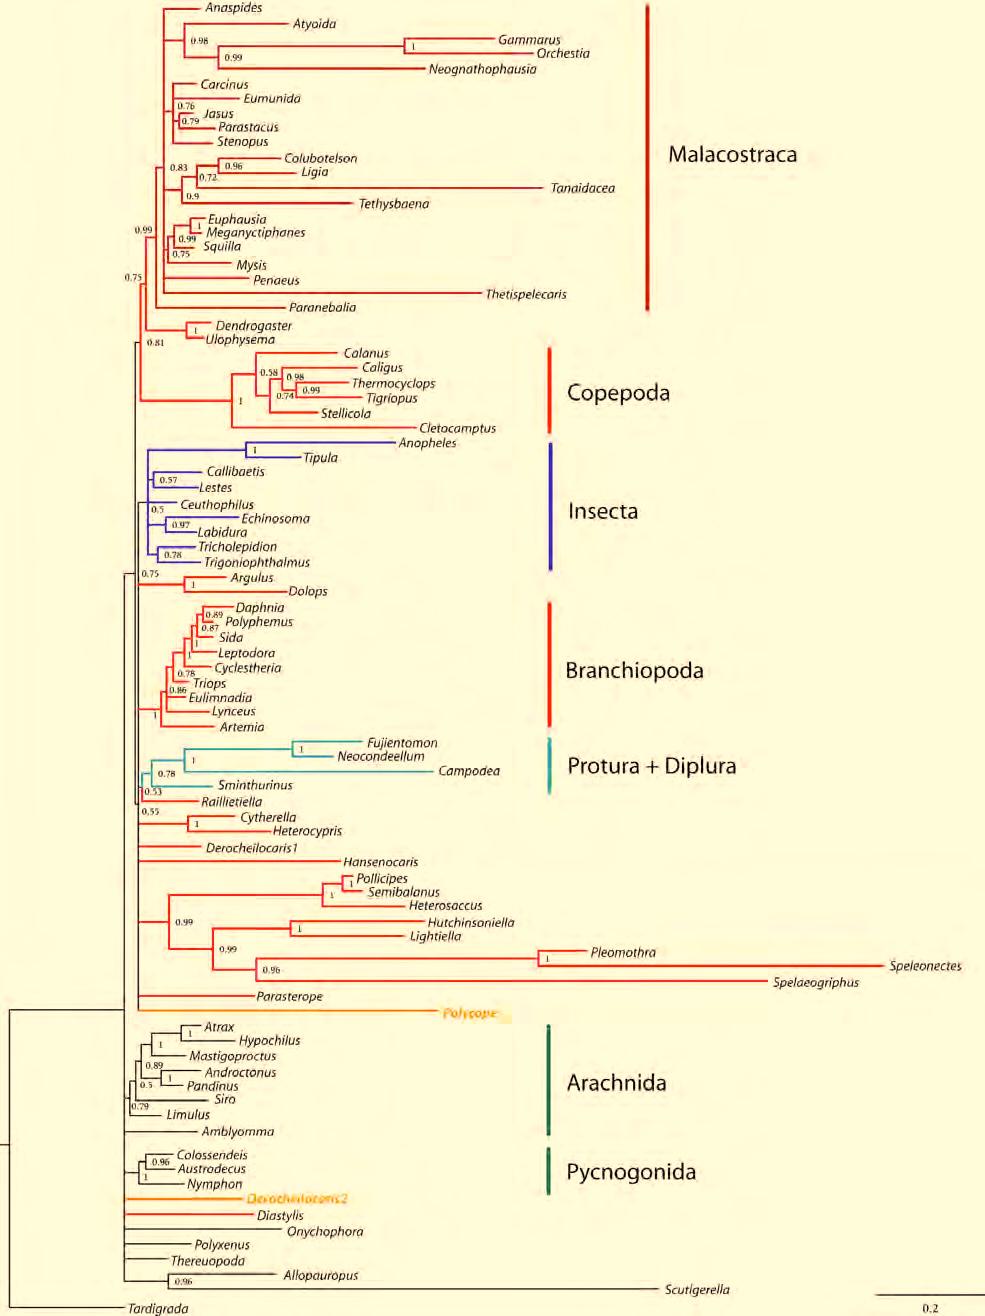 Molecular insights to crustacean phylogeny 9. Supplement Figure S8 Resulting topology of final run 9.